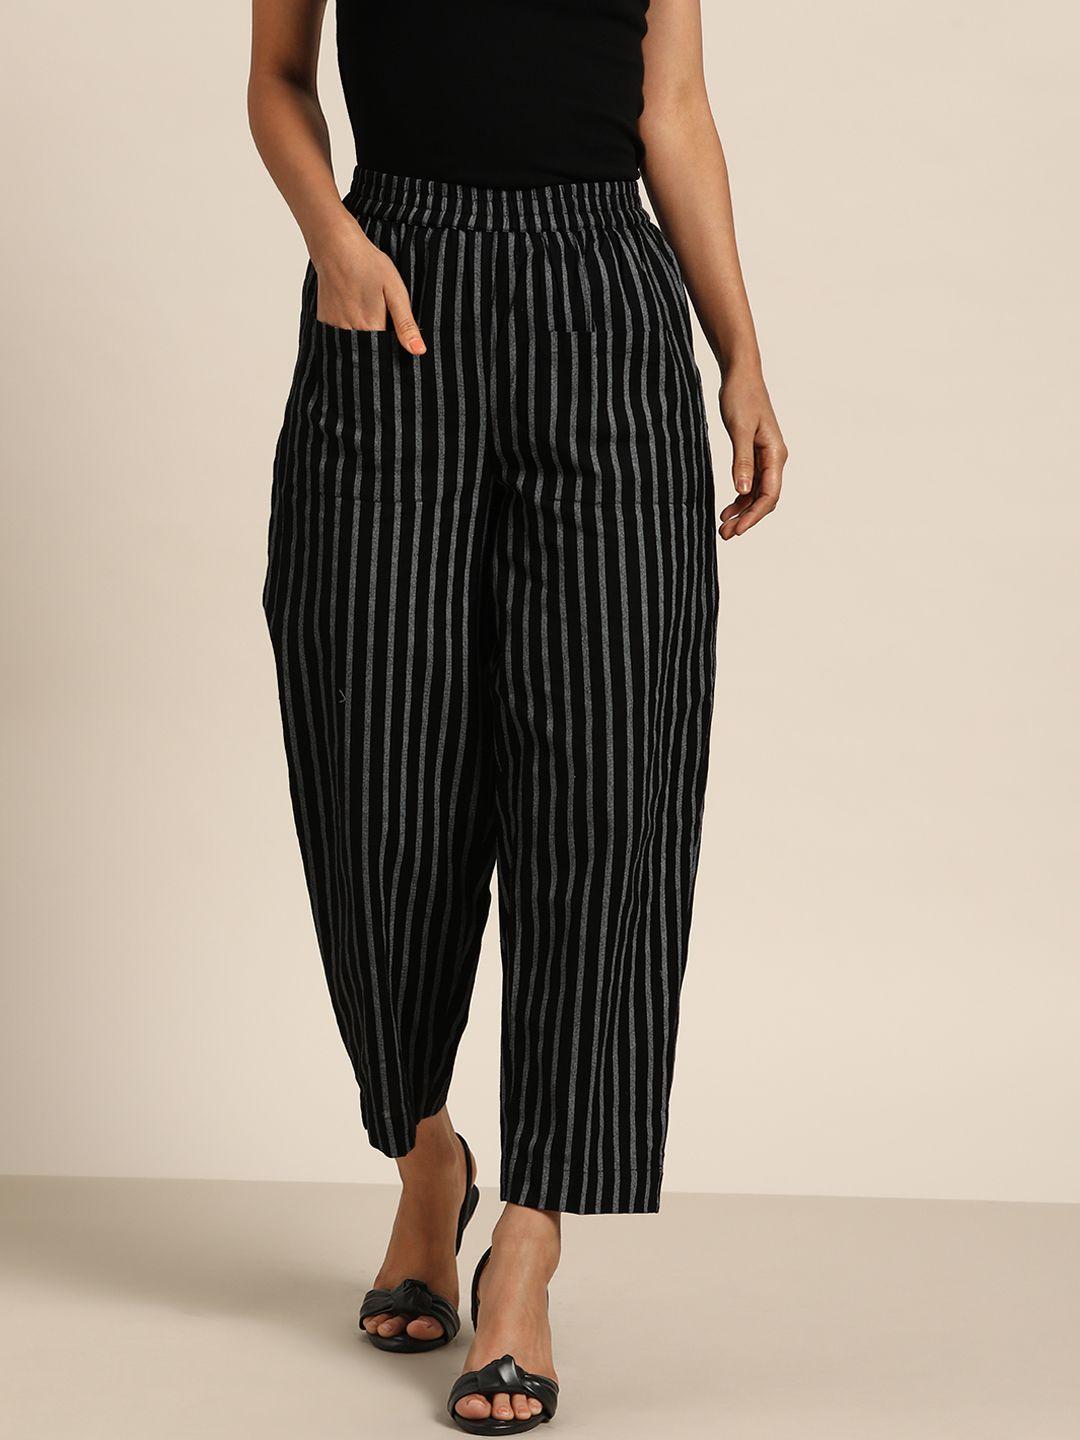 shae-by-sassafras-women-black-&-grey-tapered-fit-striped-cropped-trousers